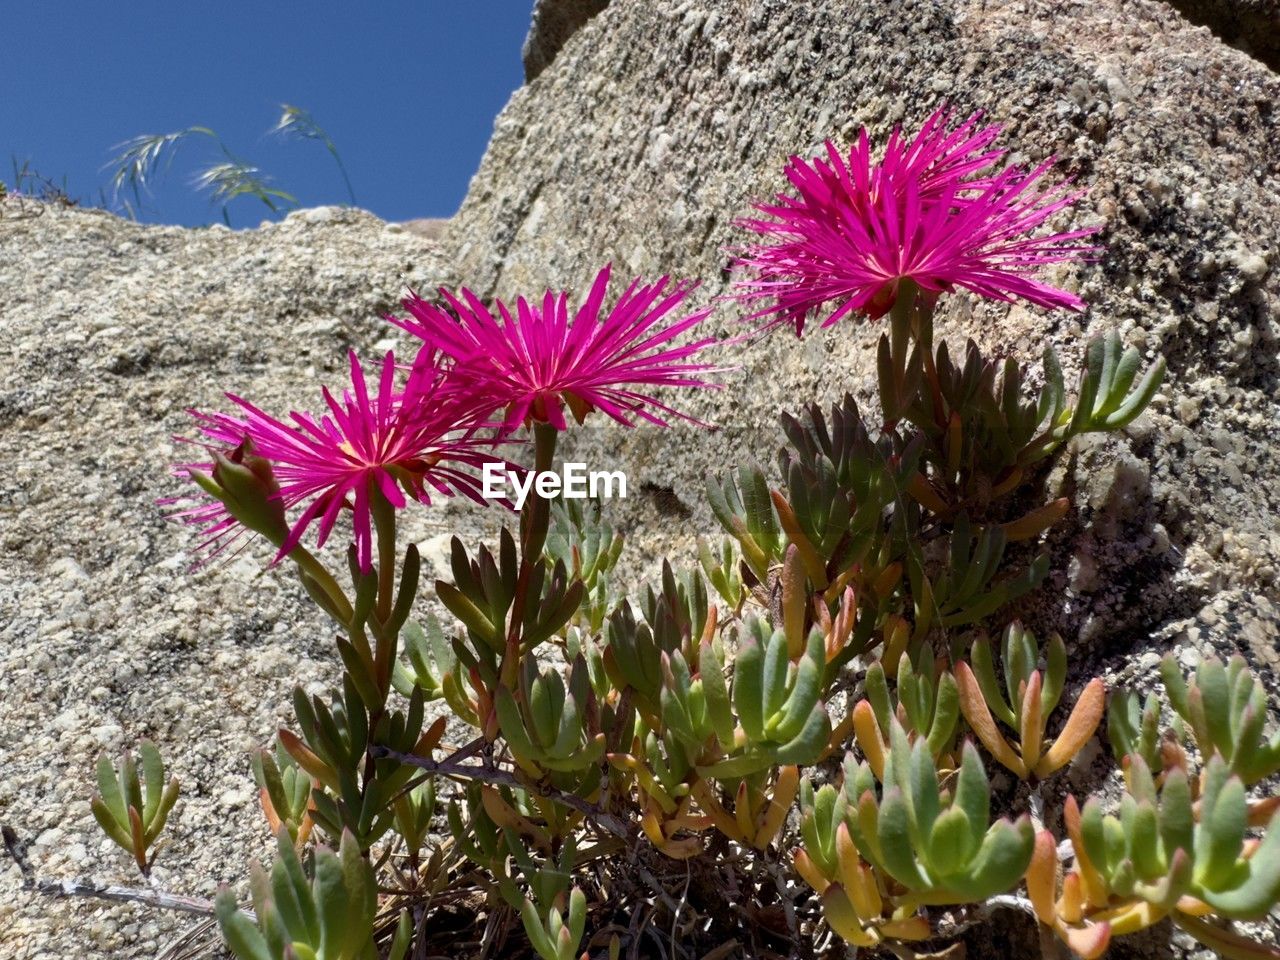 plant, flower, flowering plant, nature, beauty in nature, growth, no people, pink, freshness, sky, day, wildflower, land, close-up, outdoors, sunlight, fragility, inflorescence, flower head, succulent plant, cactus, botany, mountain